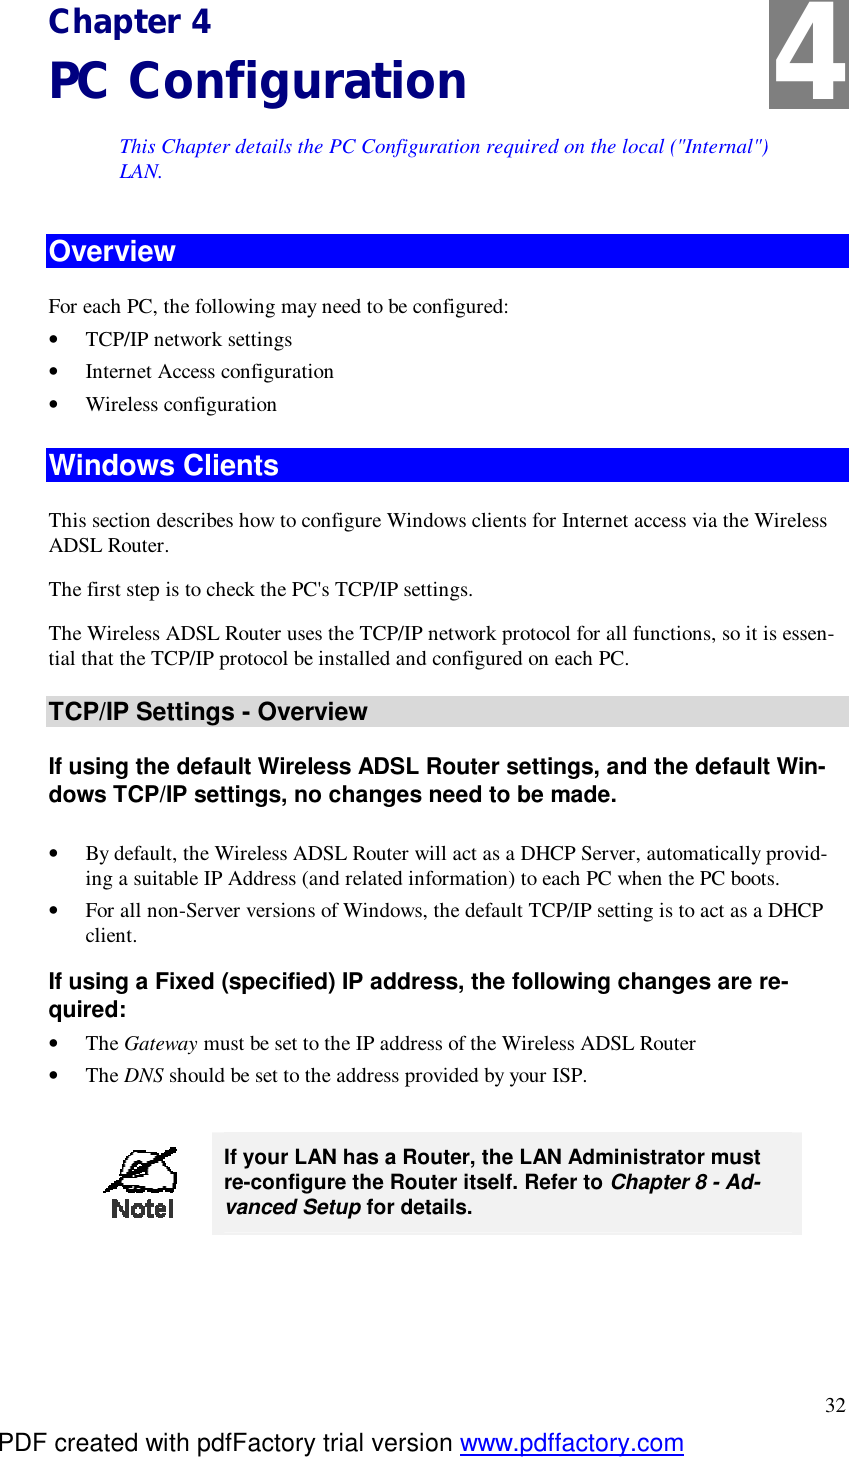  32 Chapter 4 PC Configuration This Chapter details the PC Configuration required on the local (&quot;Internal&quot;) LAN. Overview For each PC, the following may need to be configured: •  TCP/IP network settings •  Internet Access configuration •  Wireless configuration Windows Clients This section describes how to configure Windows clients for Internet access via the Wireless ADSL Router. The first step is to check the PC&apos;s TCP/IP settings.  The Wireless ADSL Router uses the TCP/IP network protocol for all functions, so it is essen-tial that the TCP/IP protocol be installed and configured on each PC. TCP/IP Settings - Overview If using the default Wireless ADSL Router settings, and the default Win-dows TCP/IP settings, no changes need to be made.  •  By default, the Wireless ADSL Router will act as a DHCP Server, automatically provid-ing a suitable IP Address (and related information) to each PC when the PC boots. •  For all non-Server versions of Windows, the default TCP/IP setting is to act as a DHCP client. If using a Fixed (specified) IP address, the following changes are re-quired: •  The Gateway must be set to the IP address of the Wireless ADSL Router •  The DNS should be set to the address provided by your ISP.   If your LAN has a Router, the LAN Administrator must re-configure the Router itself. Refer to Chapter 8 - Ad-vanced Setup for details.  4 PDF created with pdfFactory trial version www.pdffactory.com